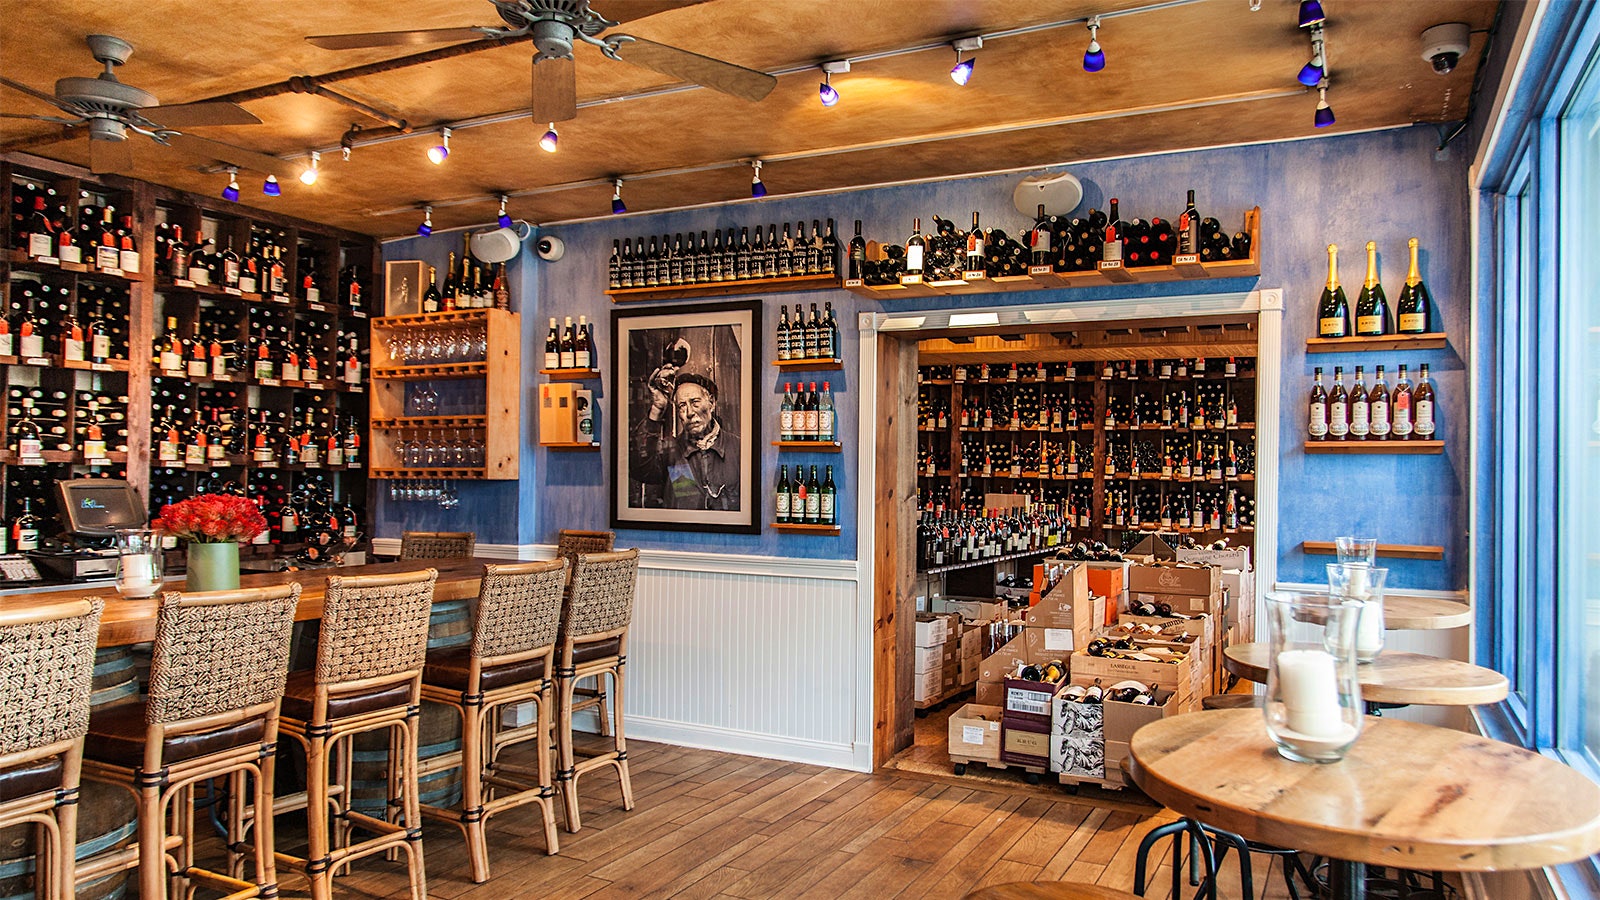  A look at the bar and cellar of Bleu Provence, with blue walls and wine bottles covering almost every surface.